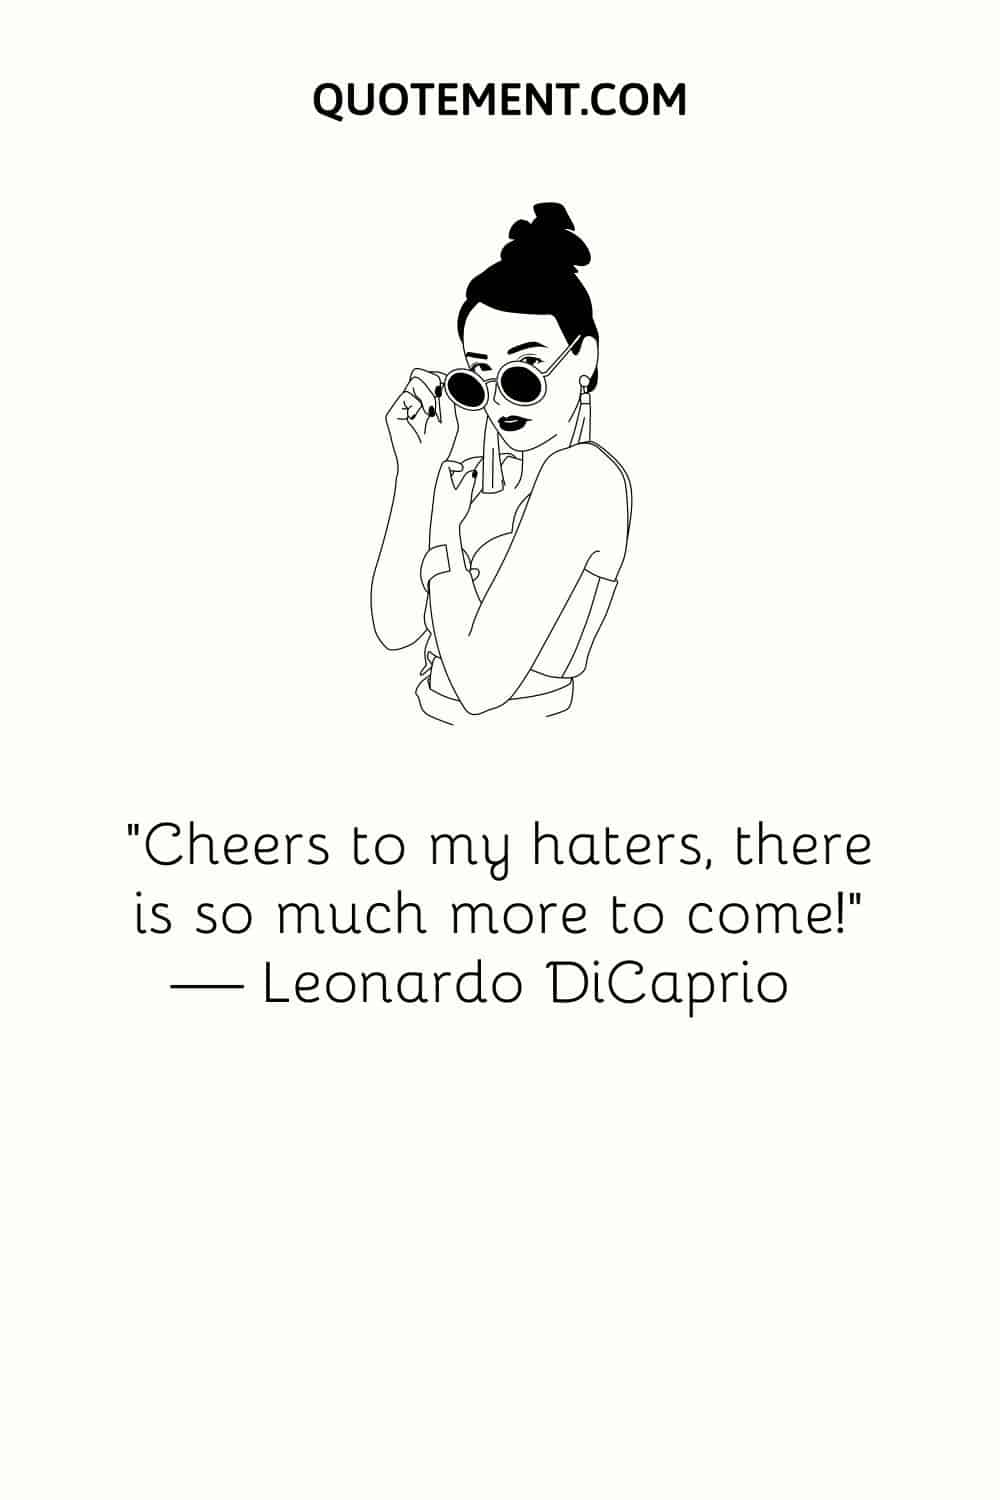 “Cheers to my haters, there is so much more to come!” — Leonardo DiCaprio